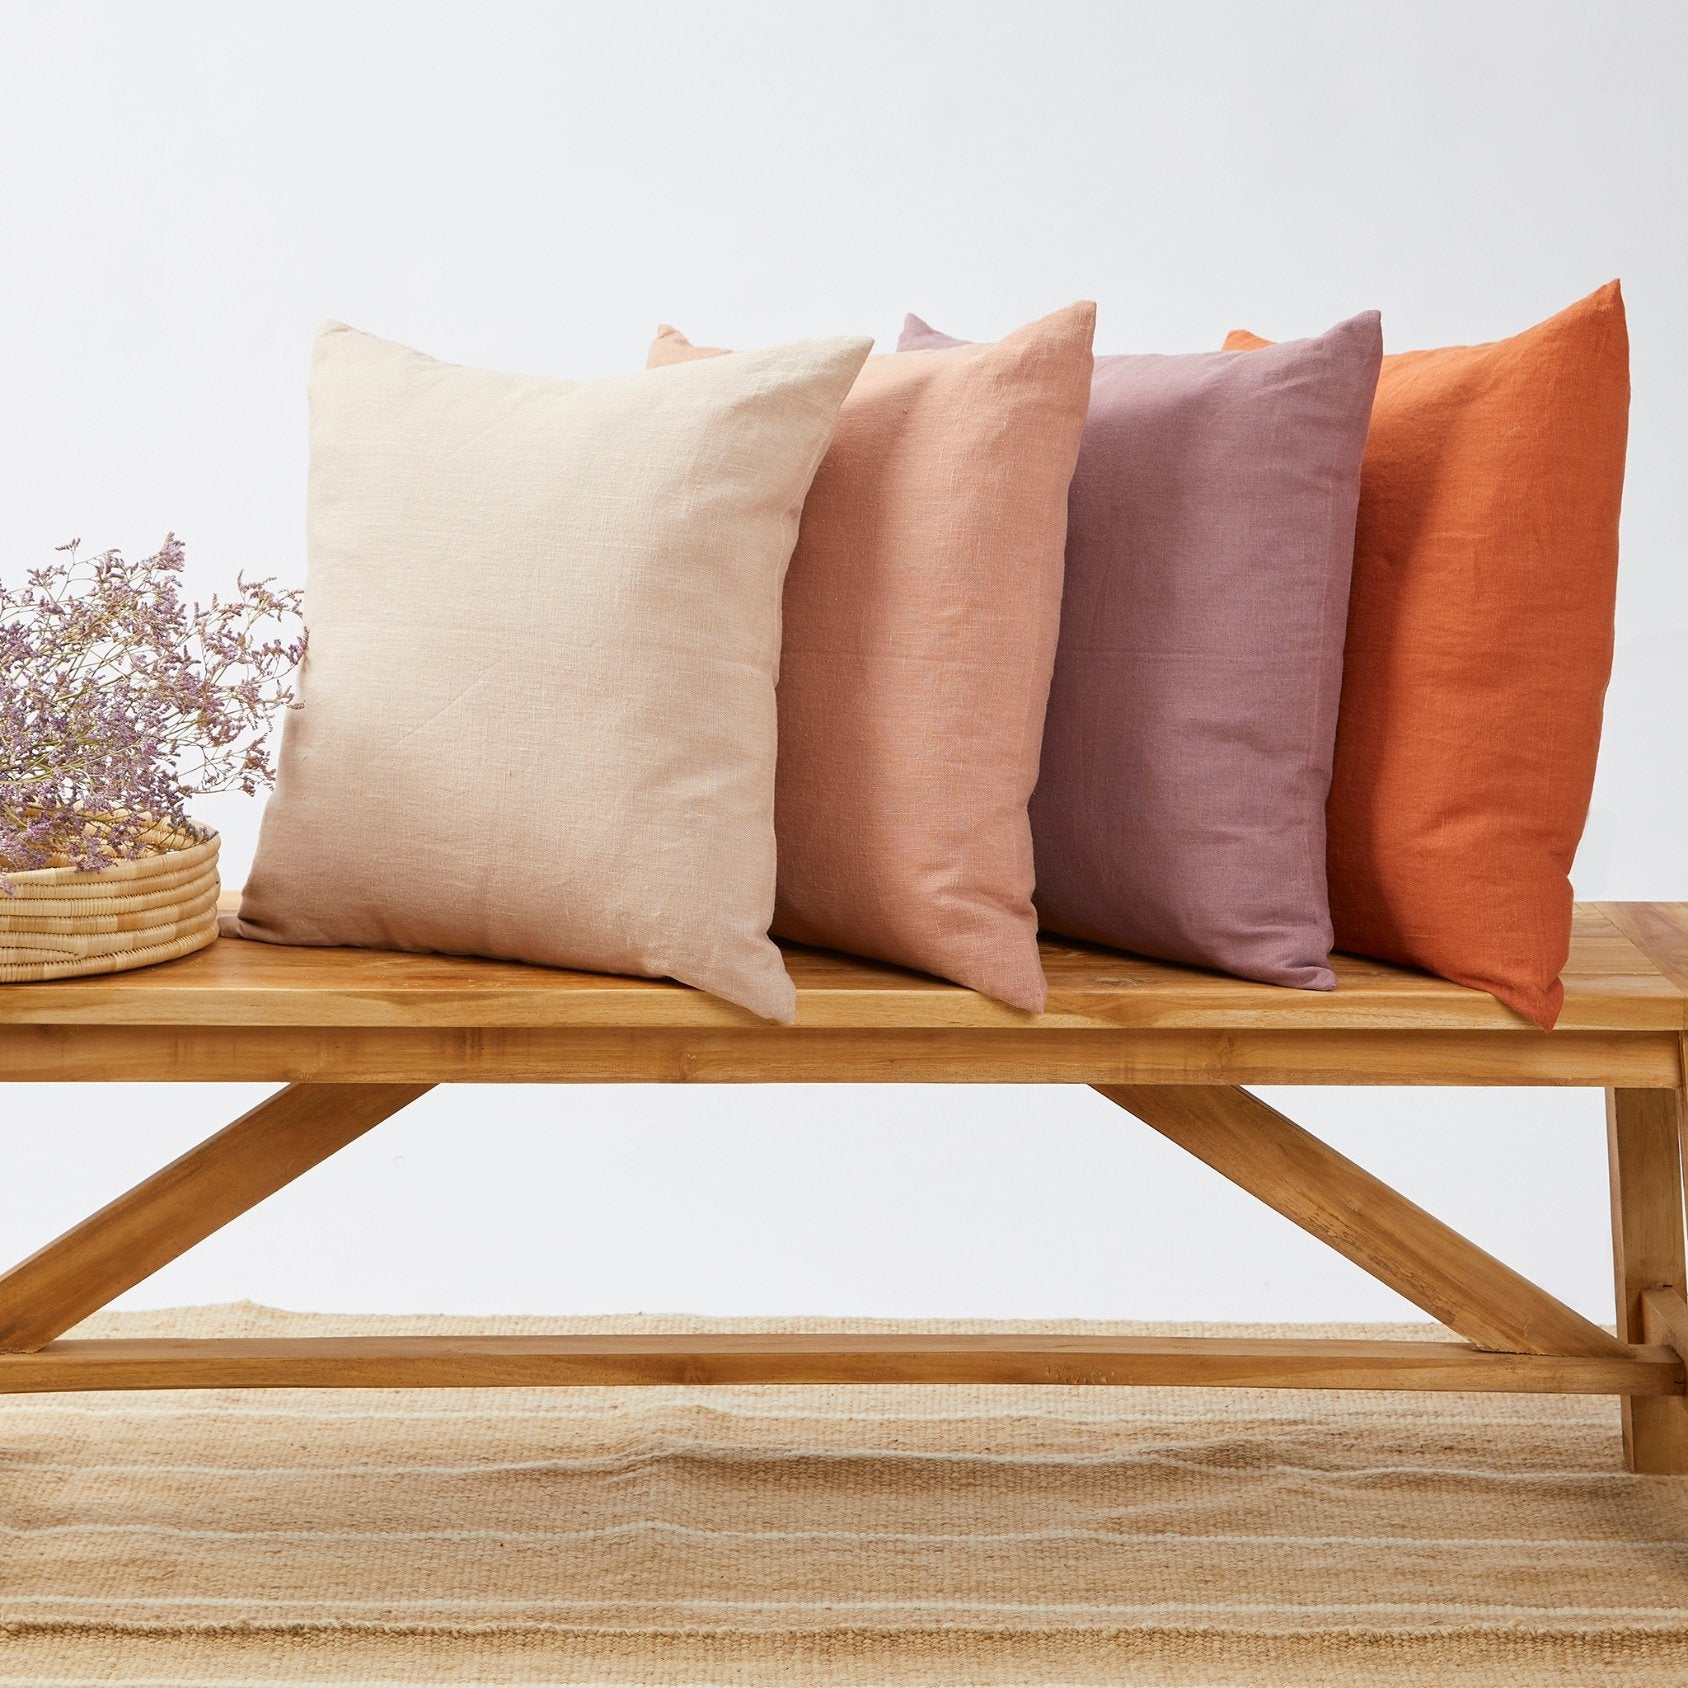 Stonewashed linen pillowcases in warm colors - By Native